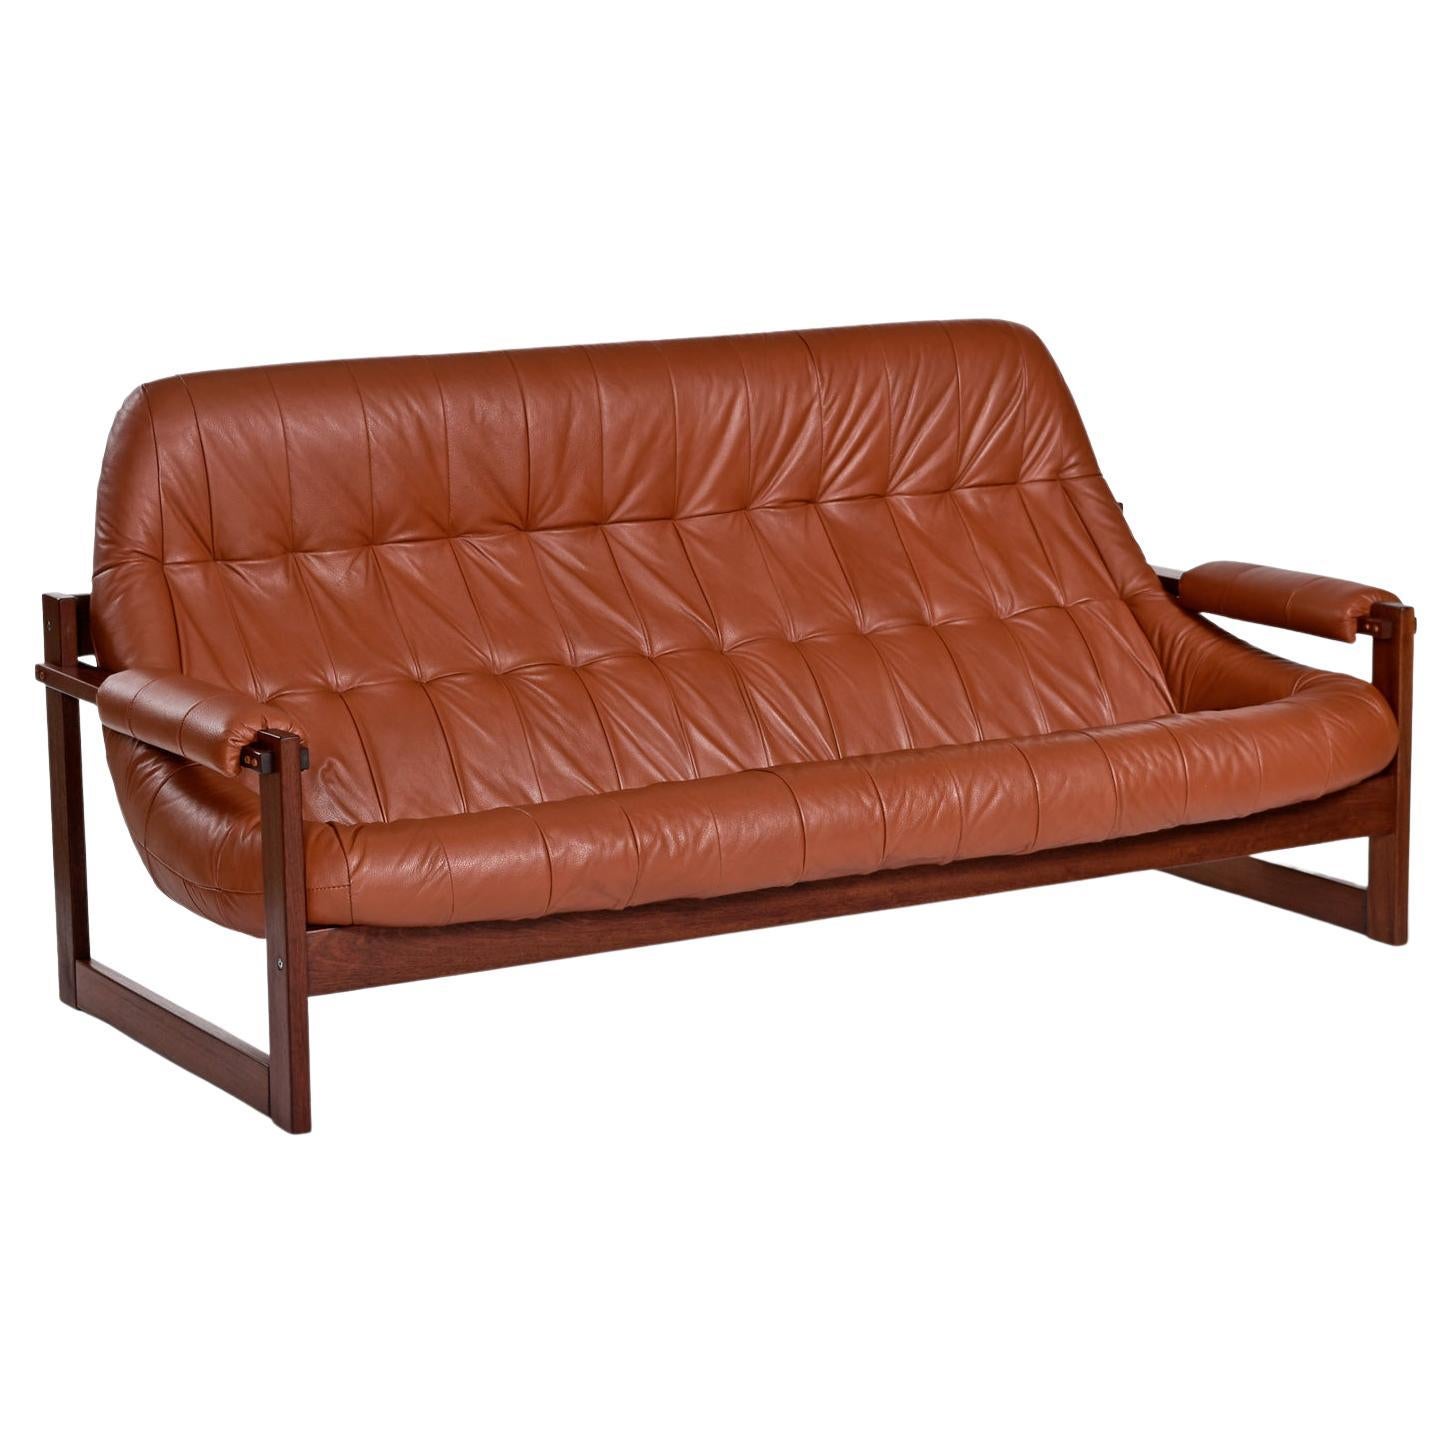 Rosewood & Cognac Leather MP-163 "Earth" 3-Seater Sofa by Percival Lafer